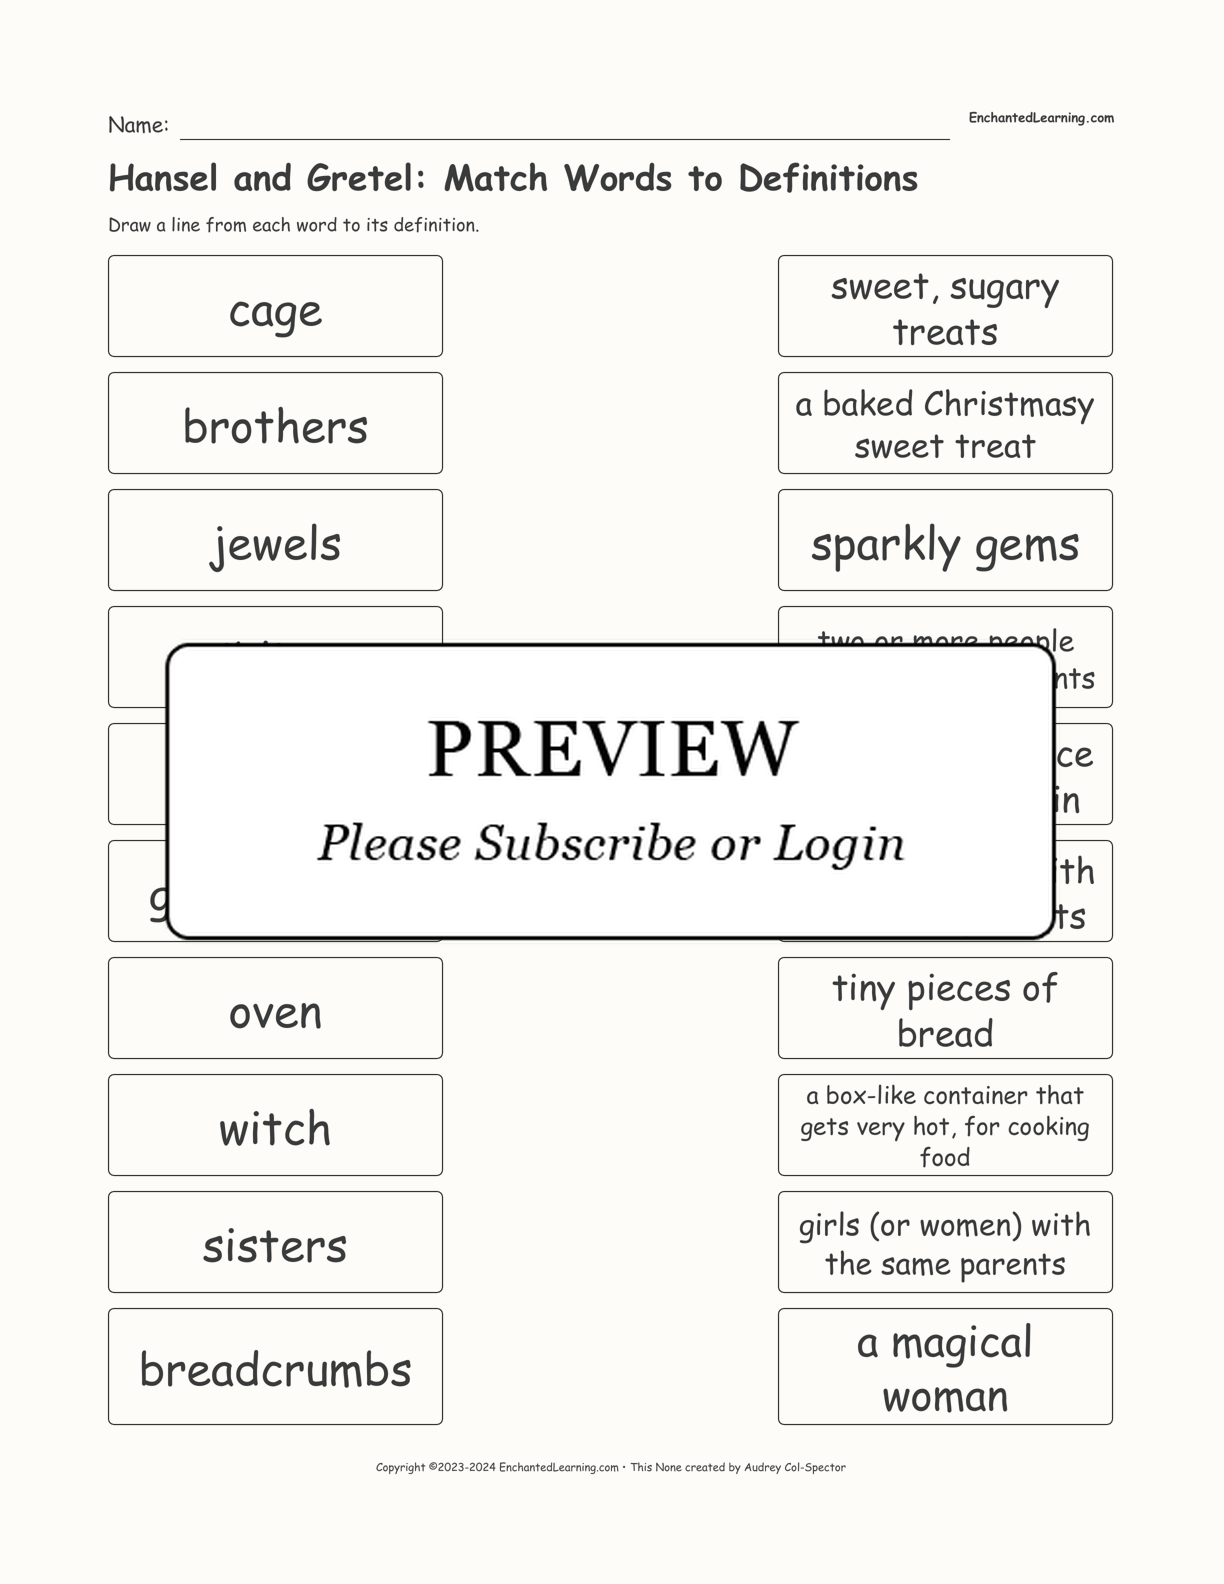 Hansel and Gretel: Match Words to Definitions interactive worksheet page 1